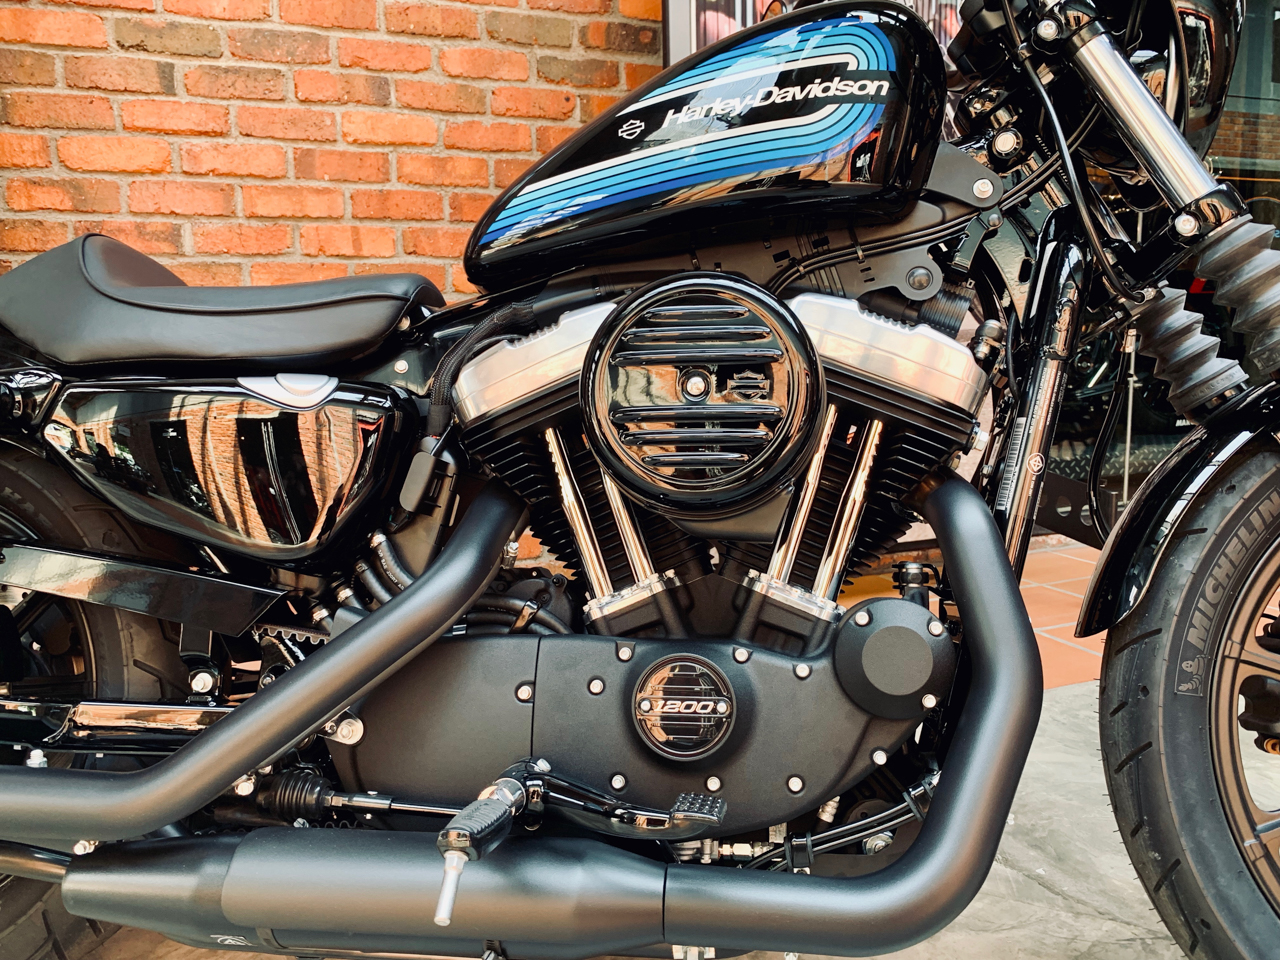 2019 Harley Davidson Sportster 1200 Iron Ready To Rumble In Malaysia Motorcycle News Motorcycle Reviews From Malaysia Asia And The World Bikesrepublic Com